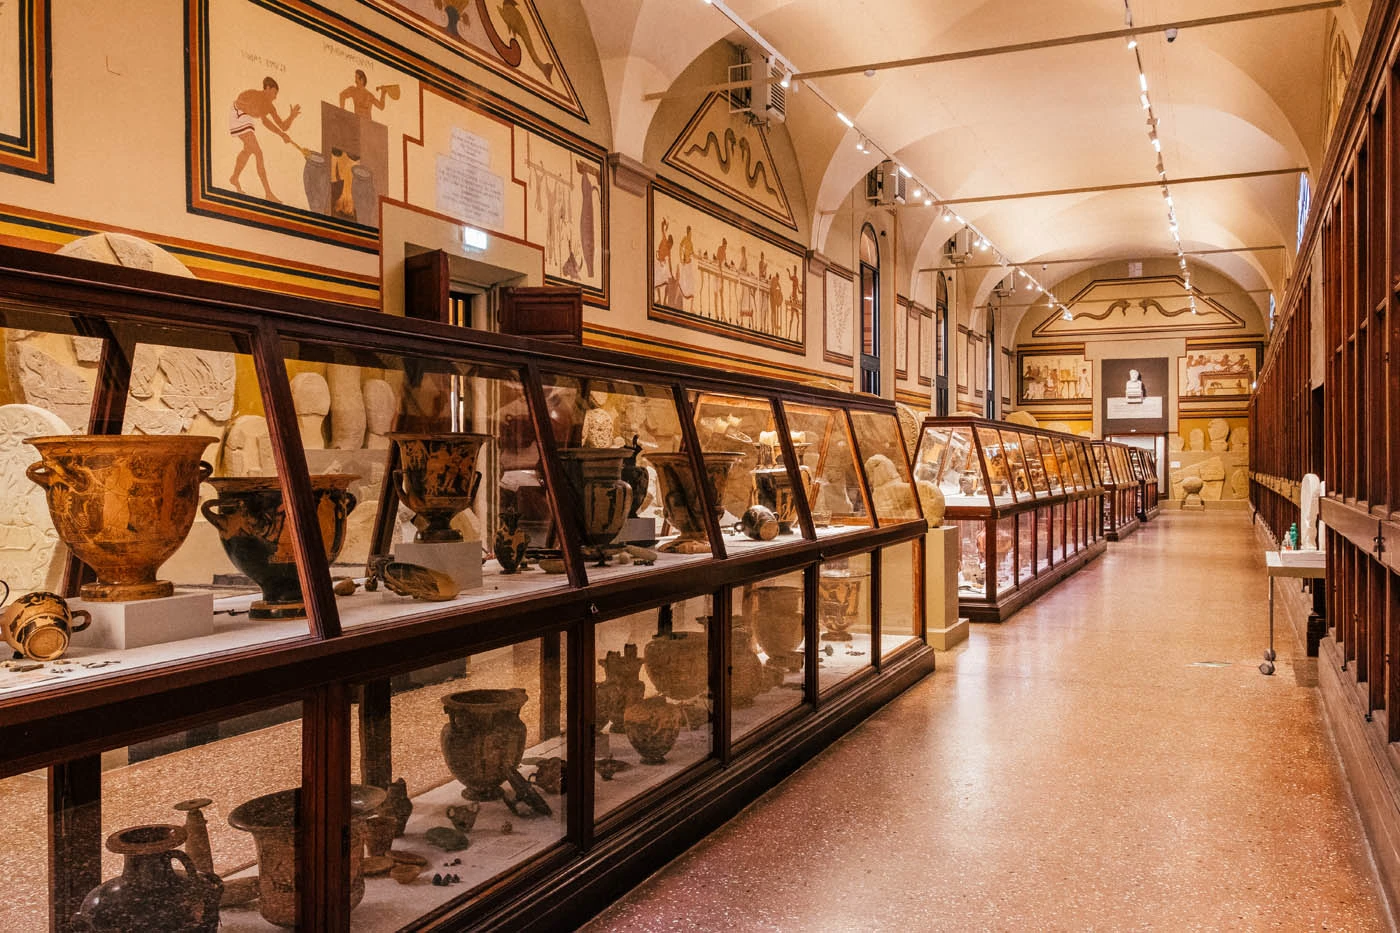 Things to Do in Bologna - Archaeological Museum of Bologna - Exhibits